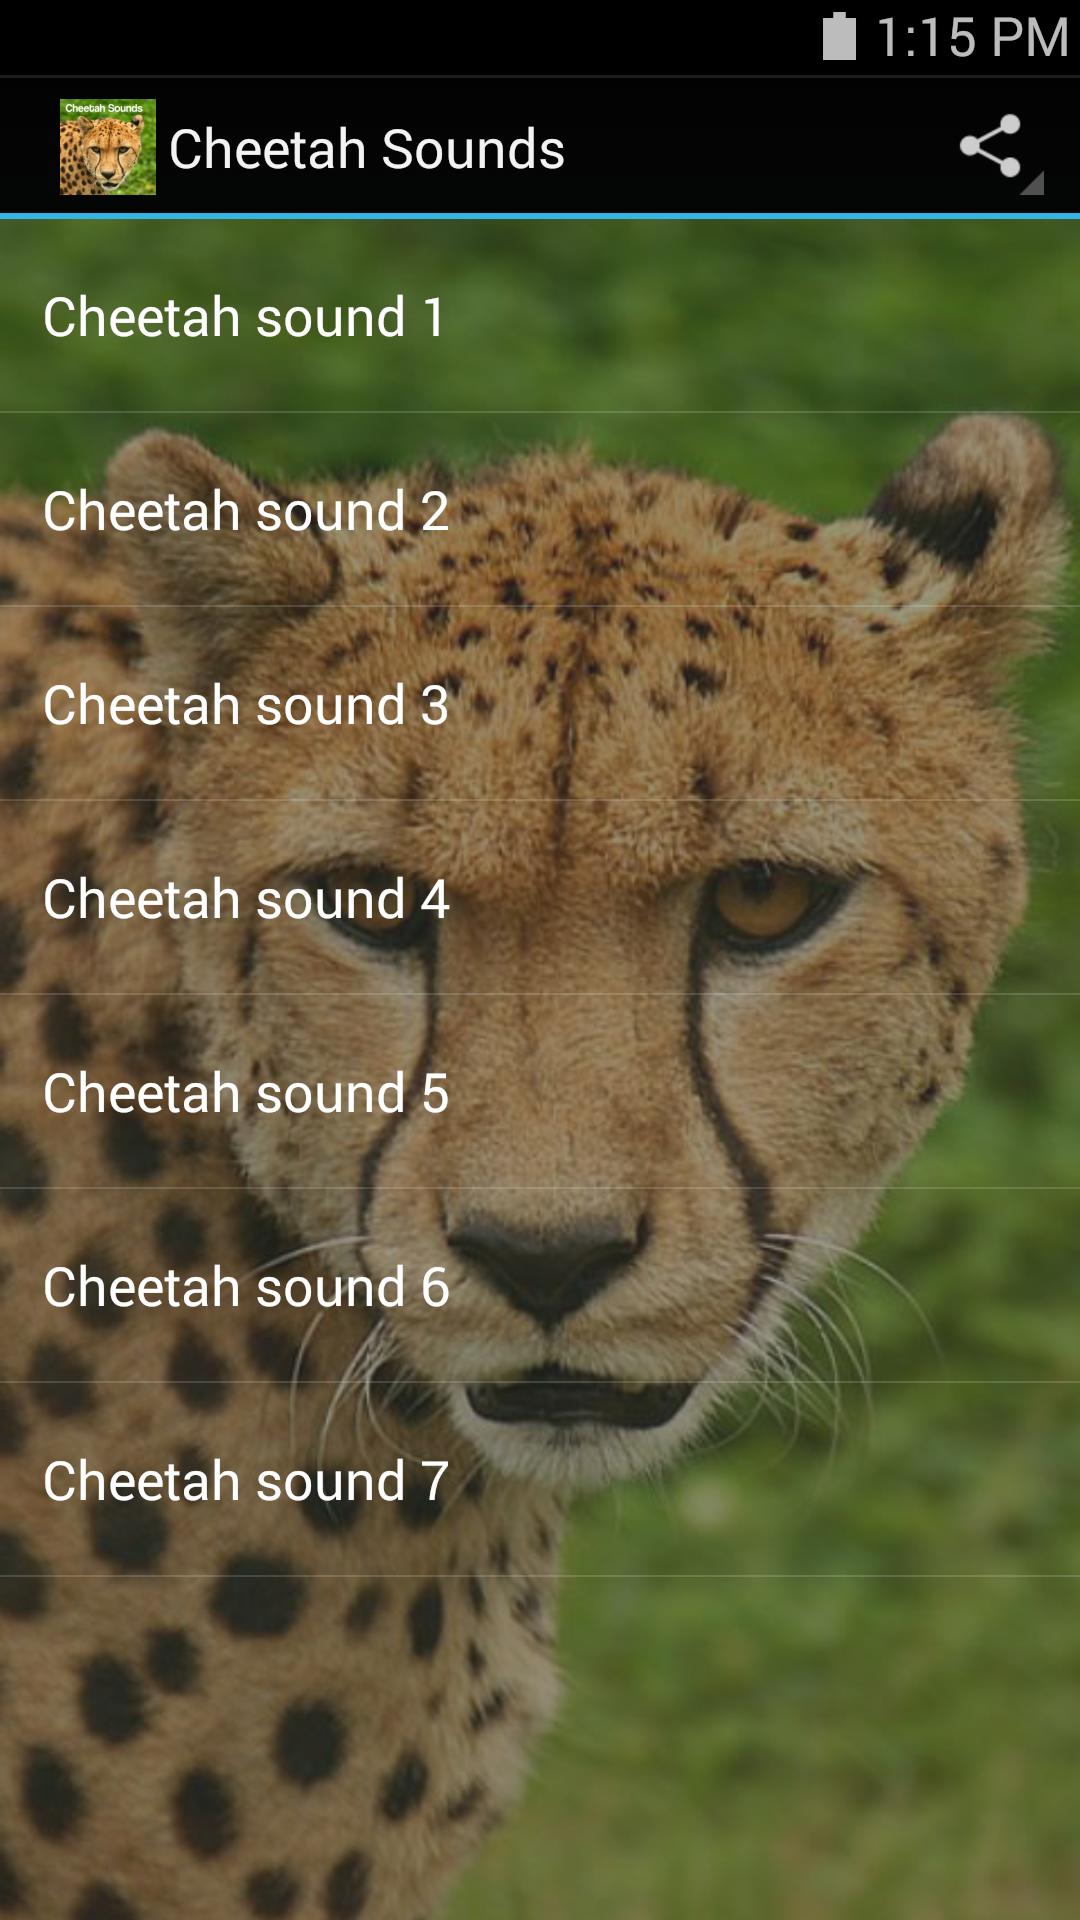 Cheetah Sounds for Android - APK Download